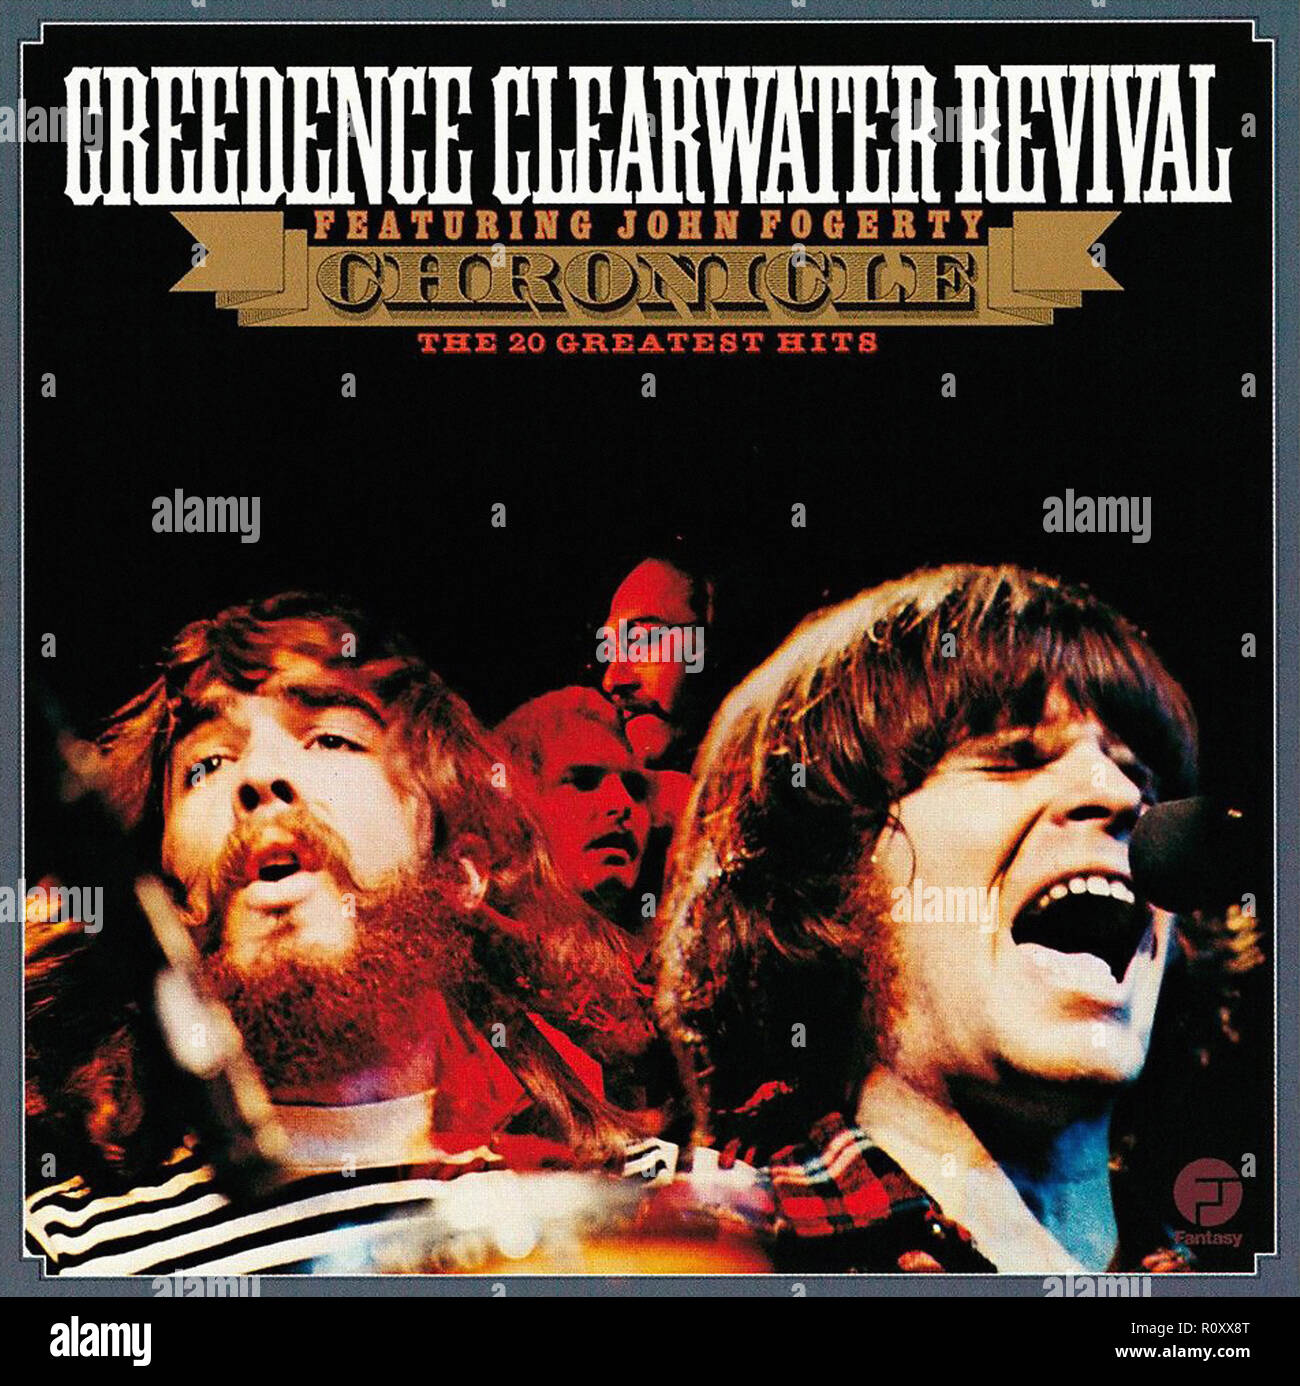 CREEDENCE CLEARWATER REVIVAL - CHRONICLES - Vintage cover album Stock Photo